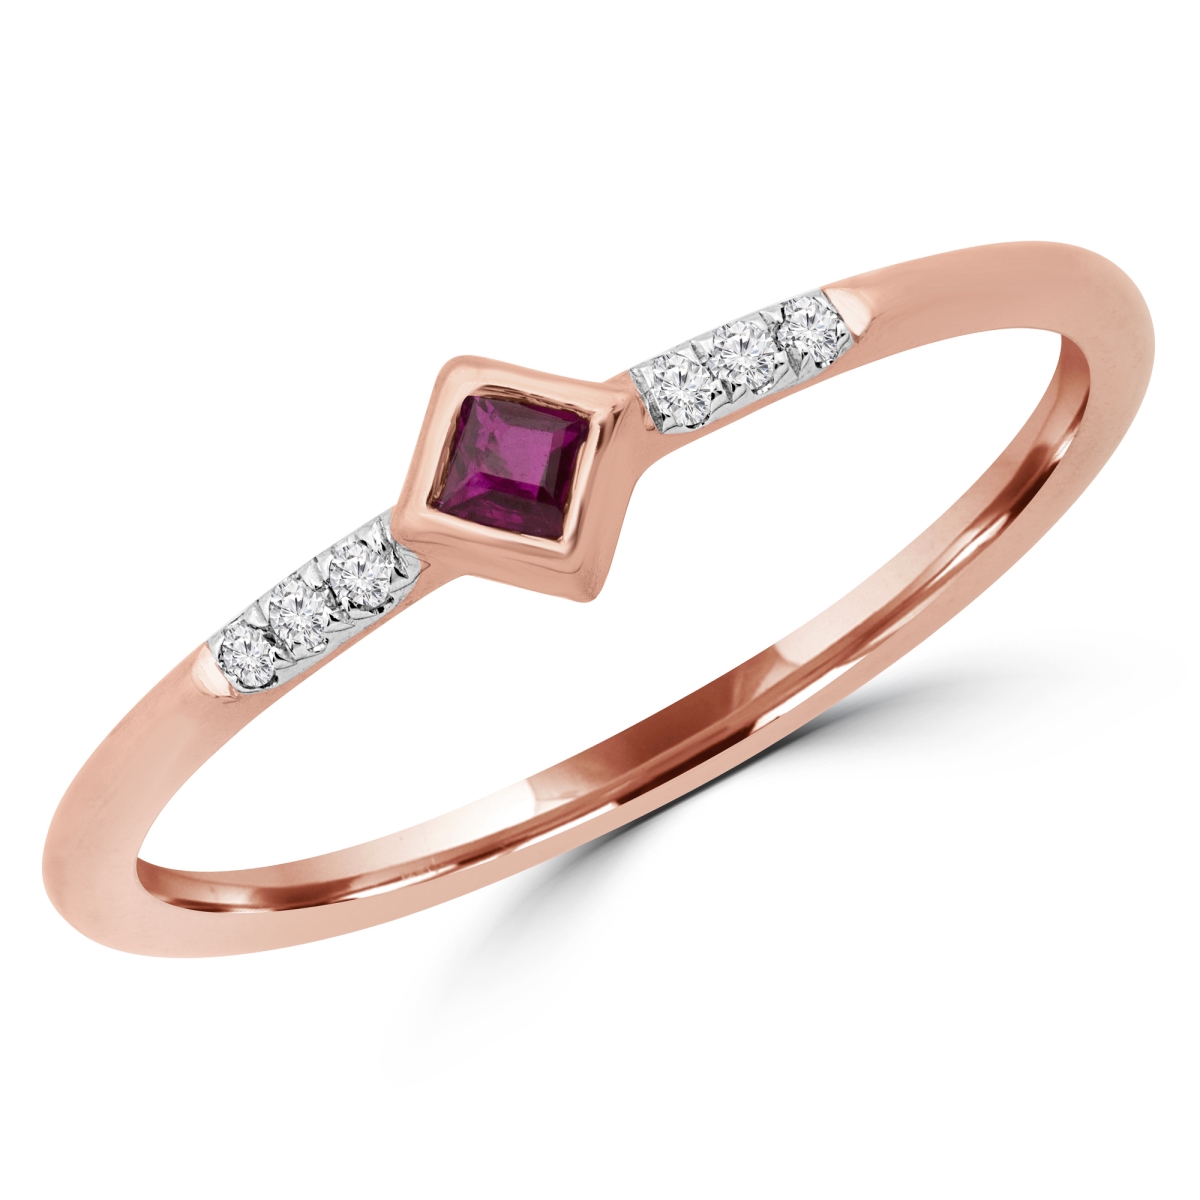 Picture of Majesty Diamonds MDR190078-7.25 0.1 CTW Round Red Ruby Bezel Set Cocktail Ring in 14K Rose Gold - Size 7.25